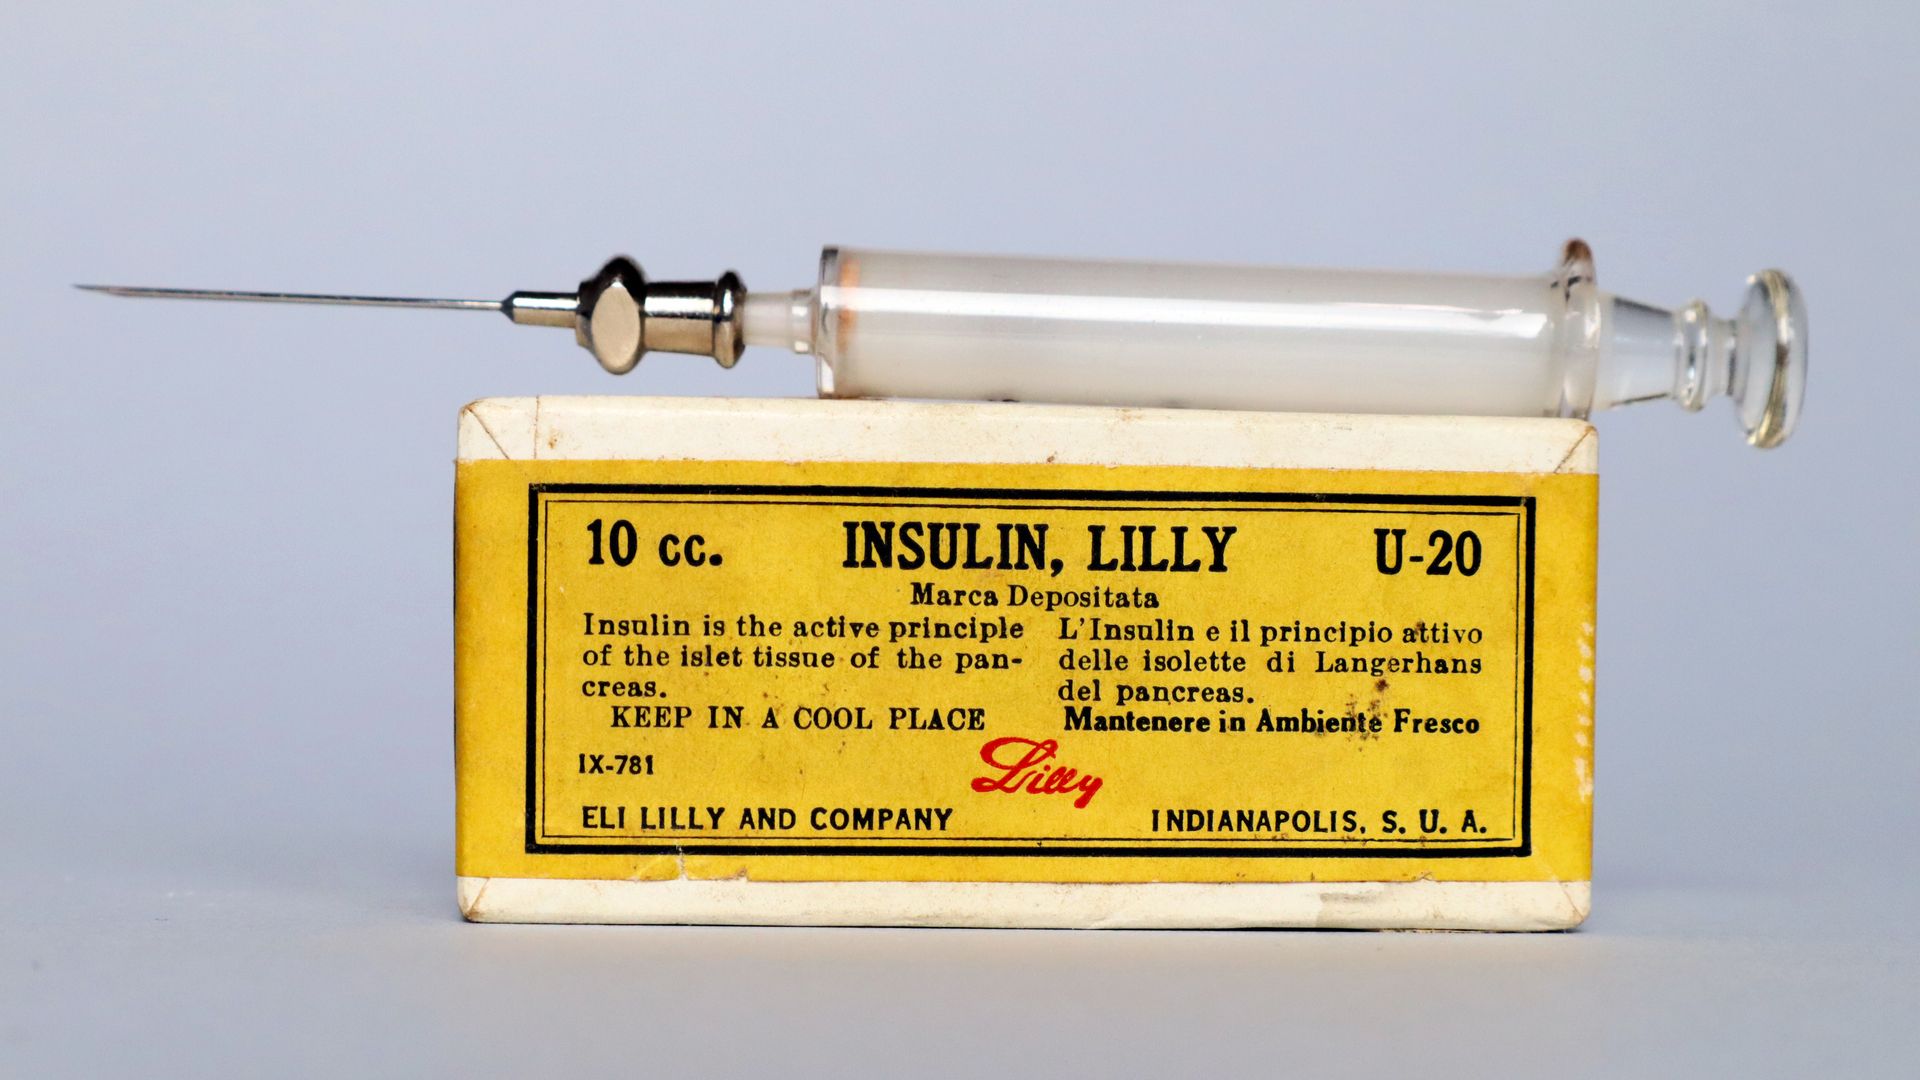 An old insulin syringe and a old insulin box